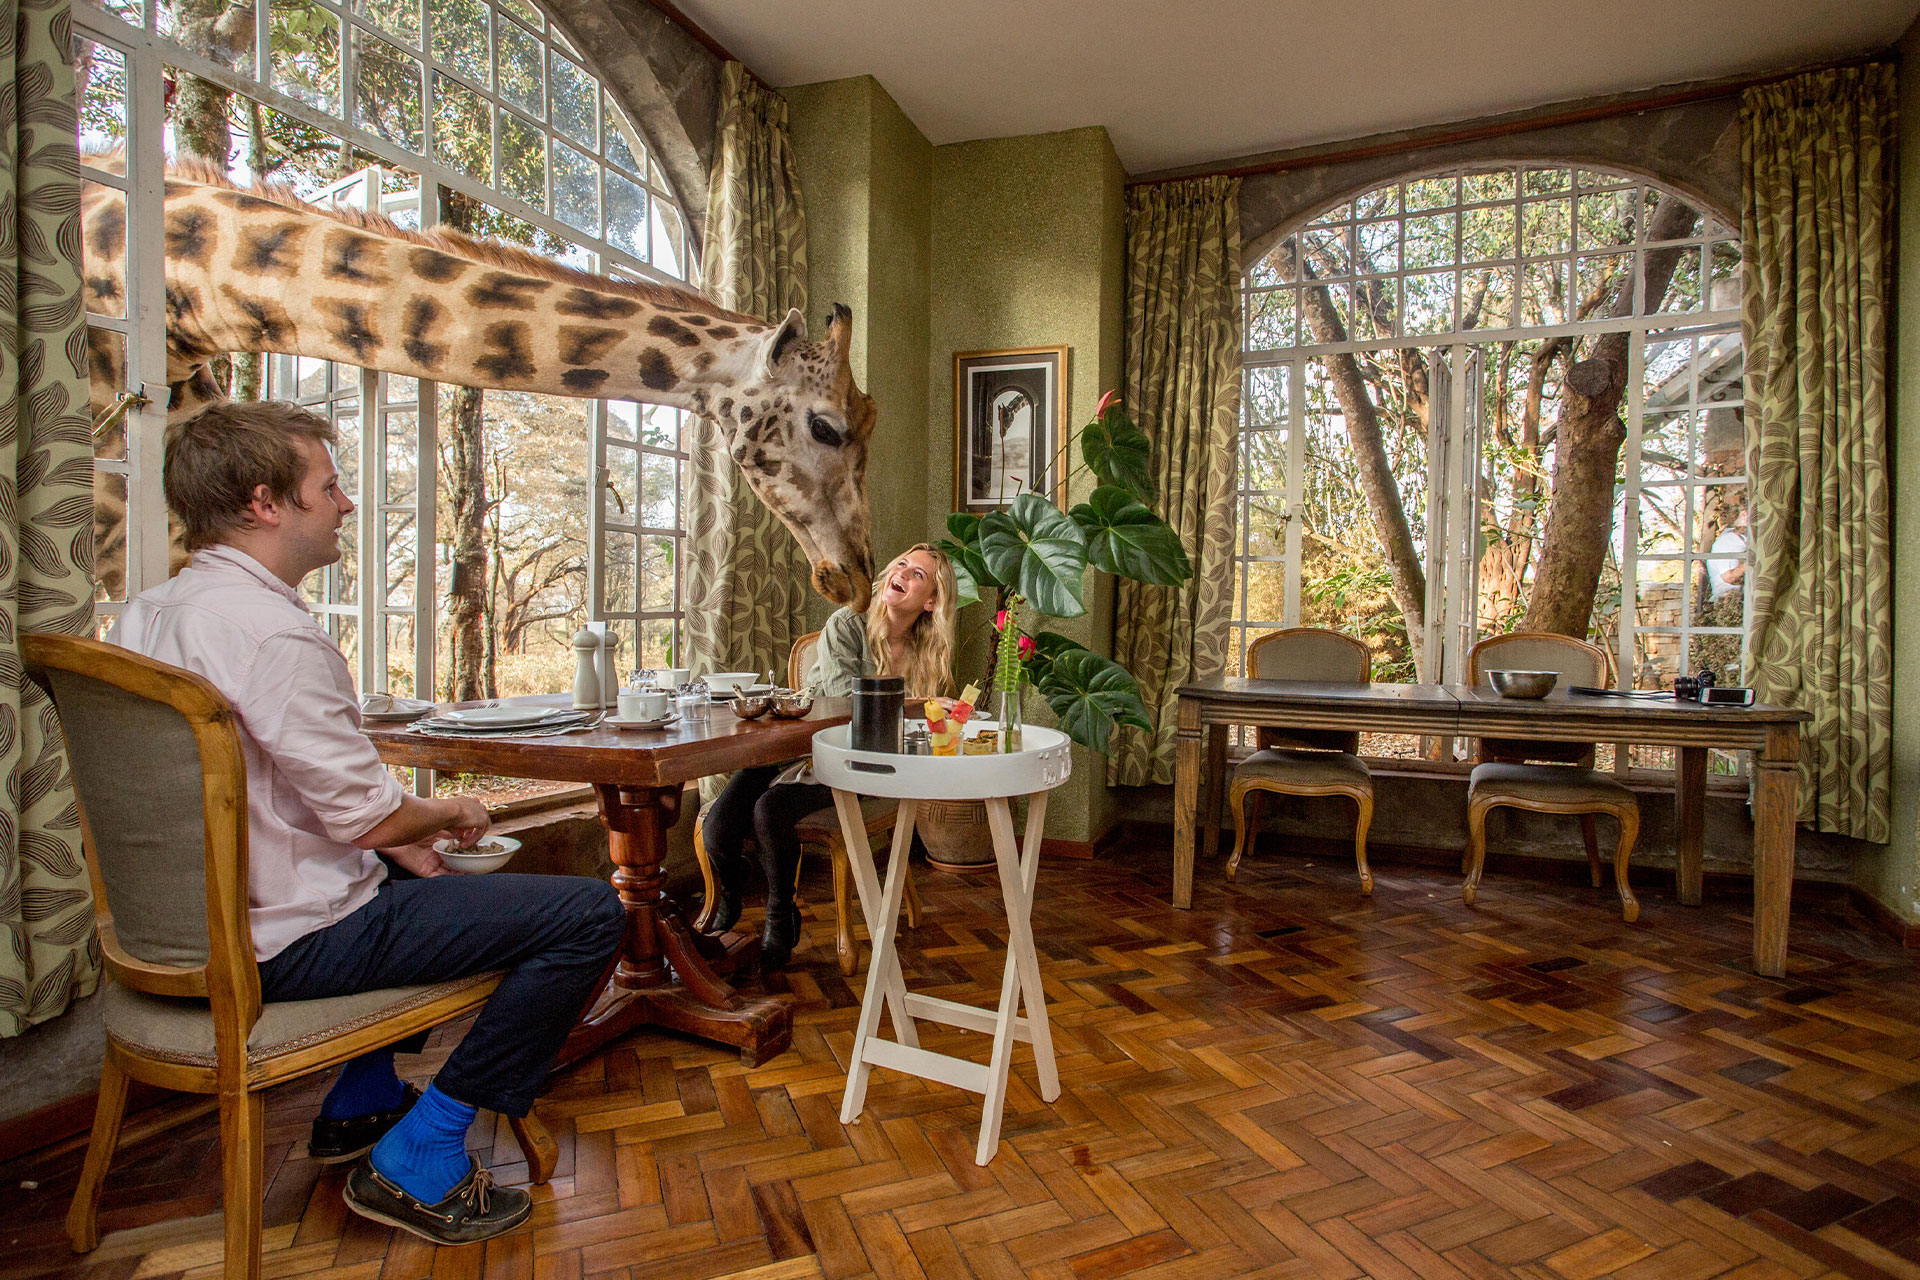 A giraffe’s head and neck reaching into an open window as a couple have breakfast at Giraffe Manor, Kenya – a bucket list experience in East Africa.